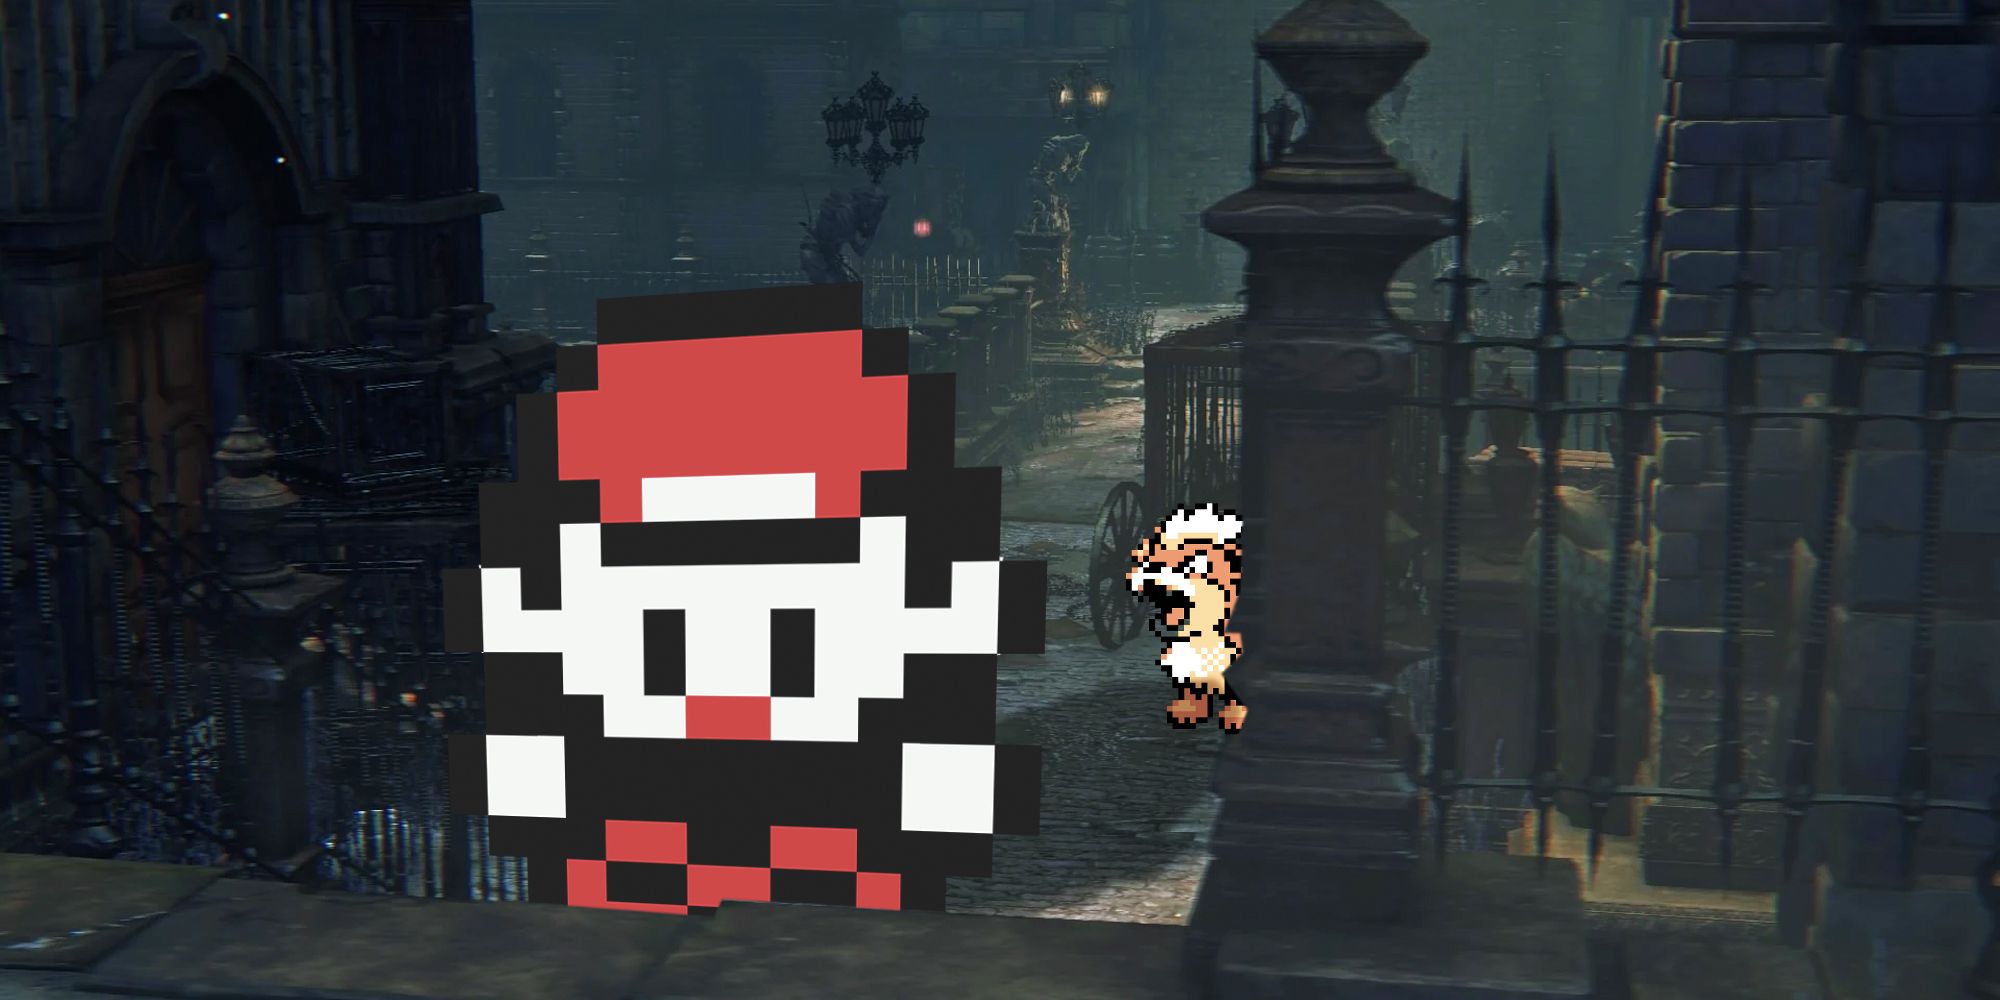 Pokemon Red protagonist and Growlithe in Bloodborne